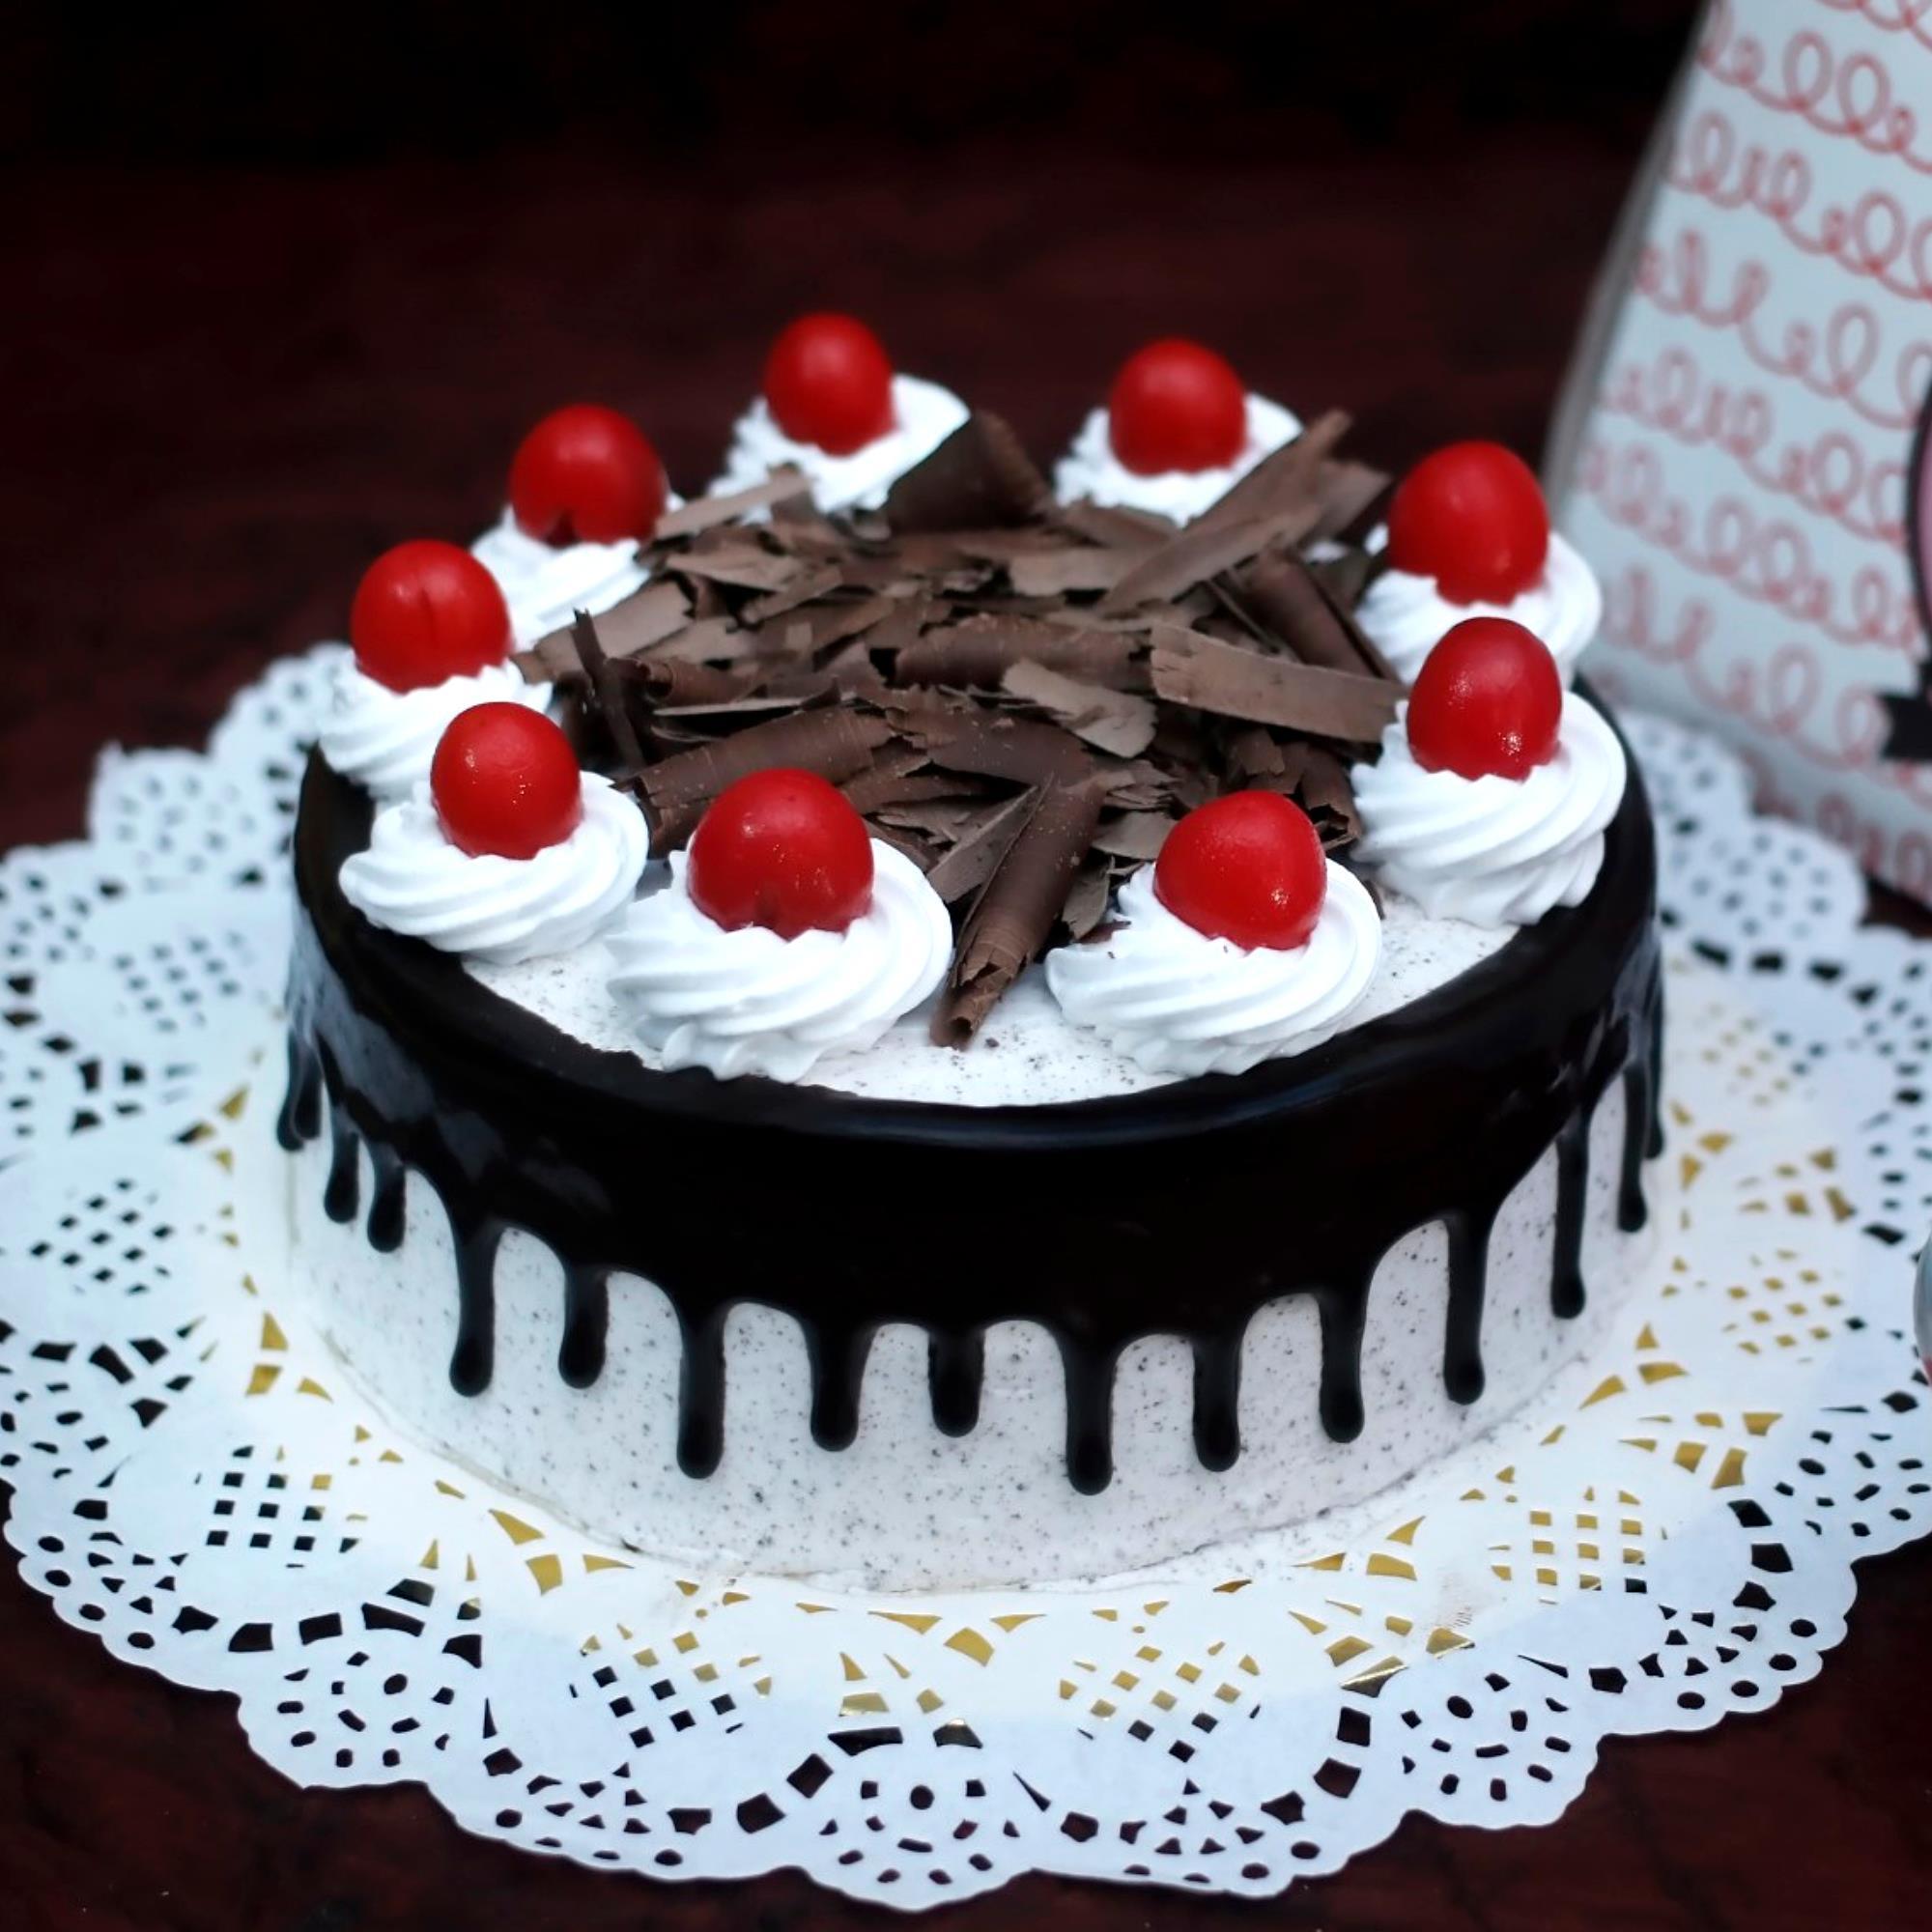 Best Black Forest Cake Recipe | With Cherries and whipped cream